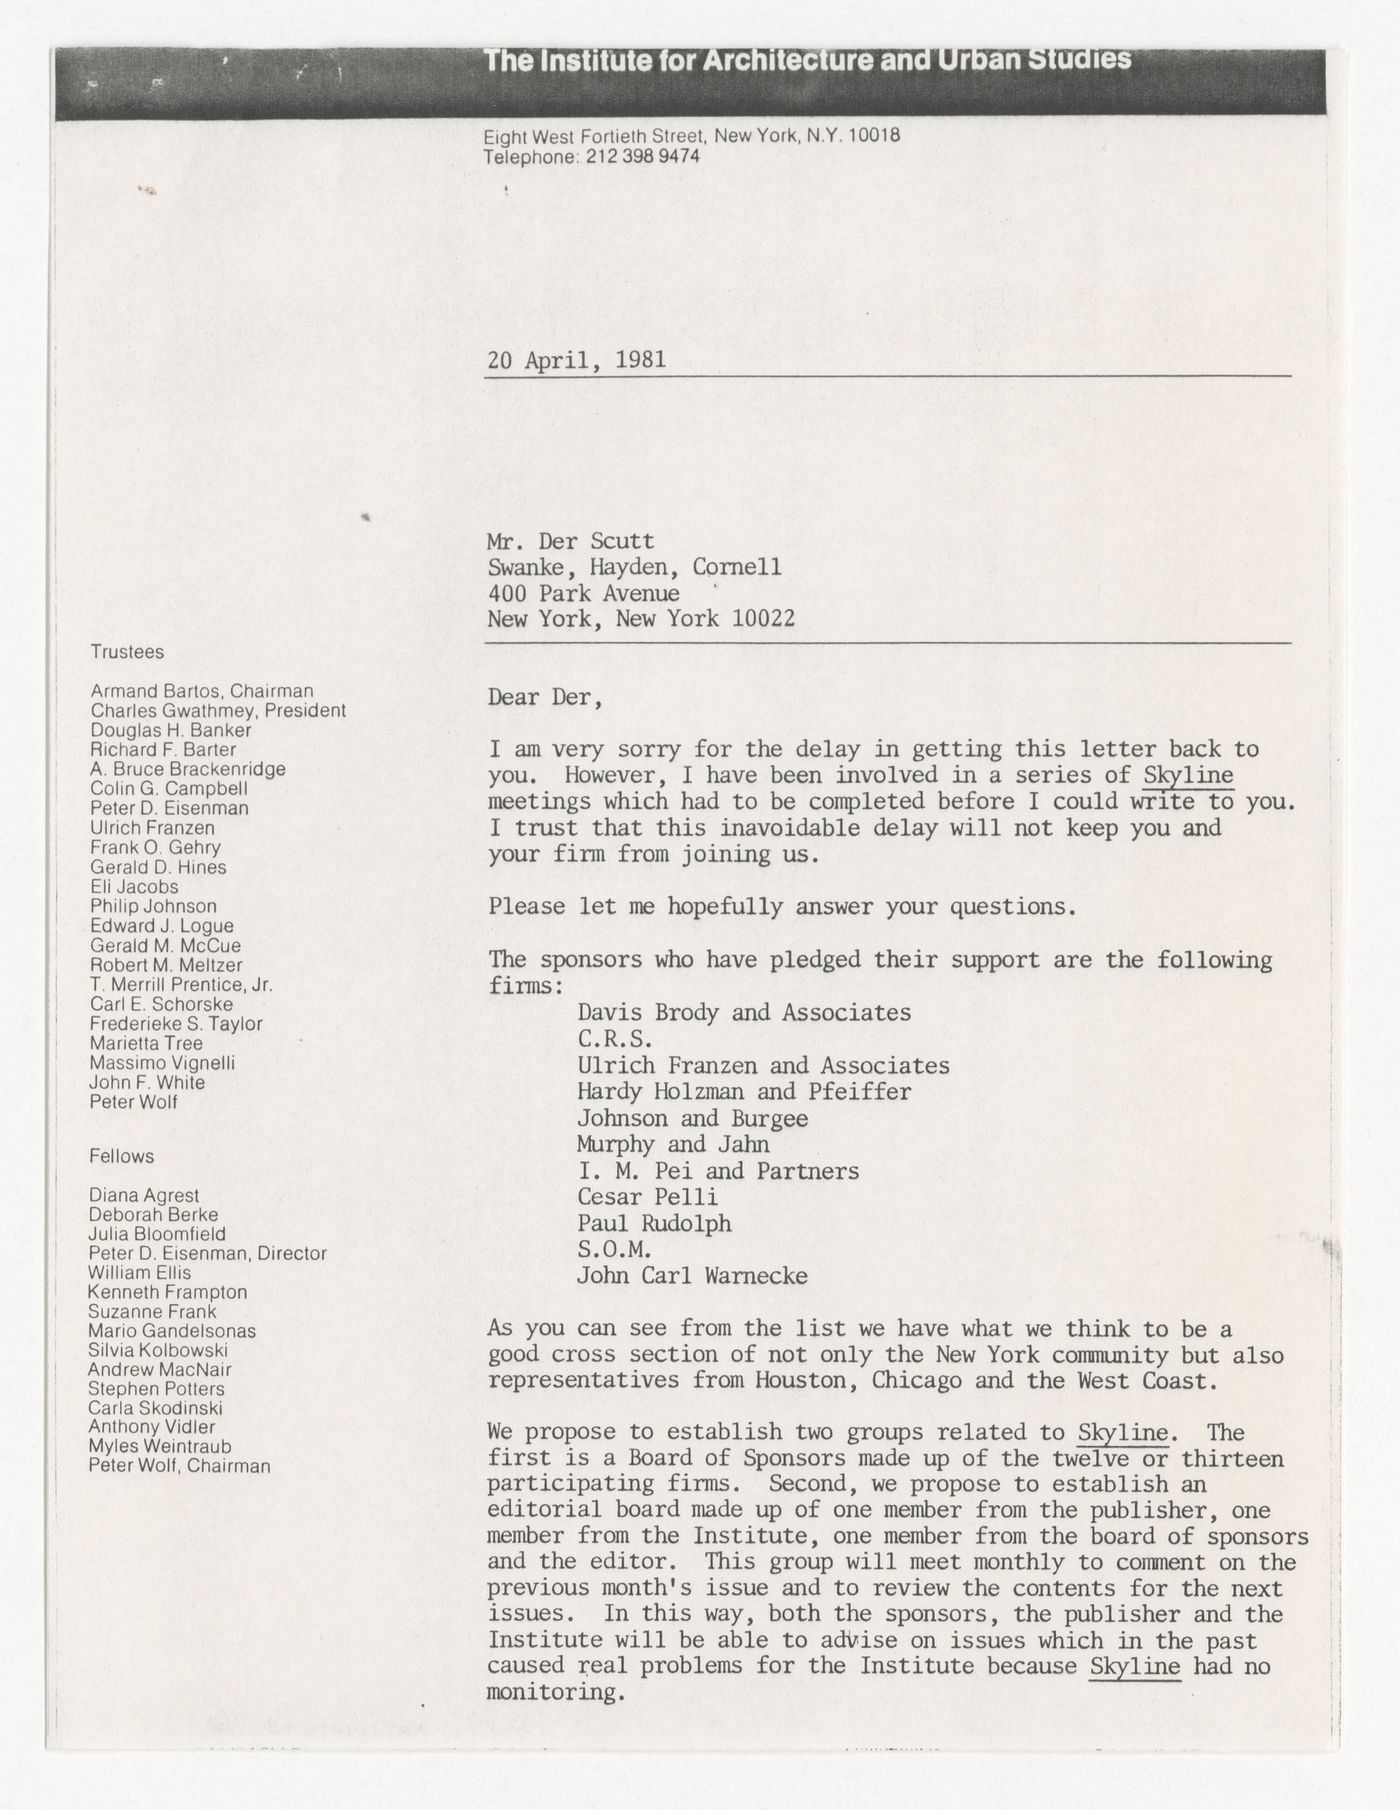 Letter from Peter D. Eisenman to Der Scutt about sponsorship for Skyline